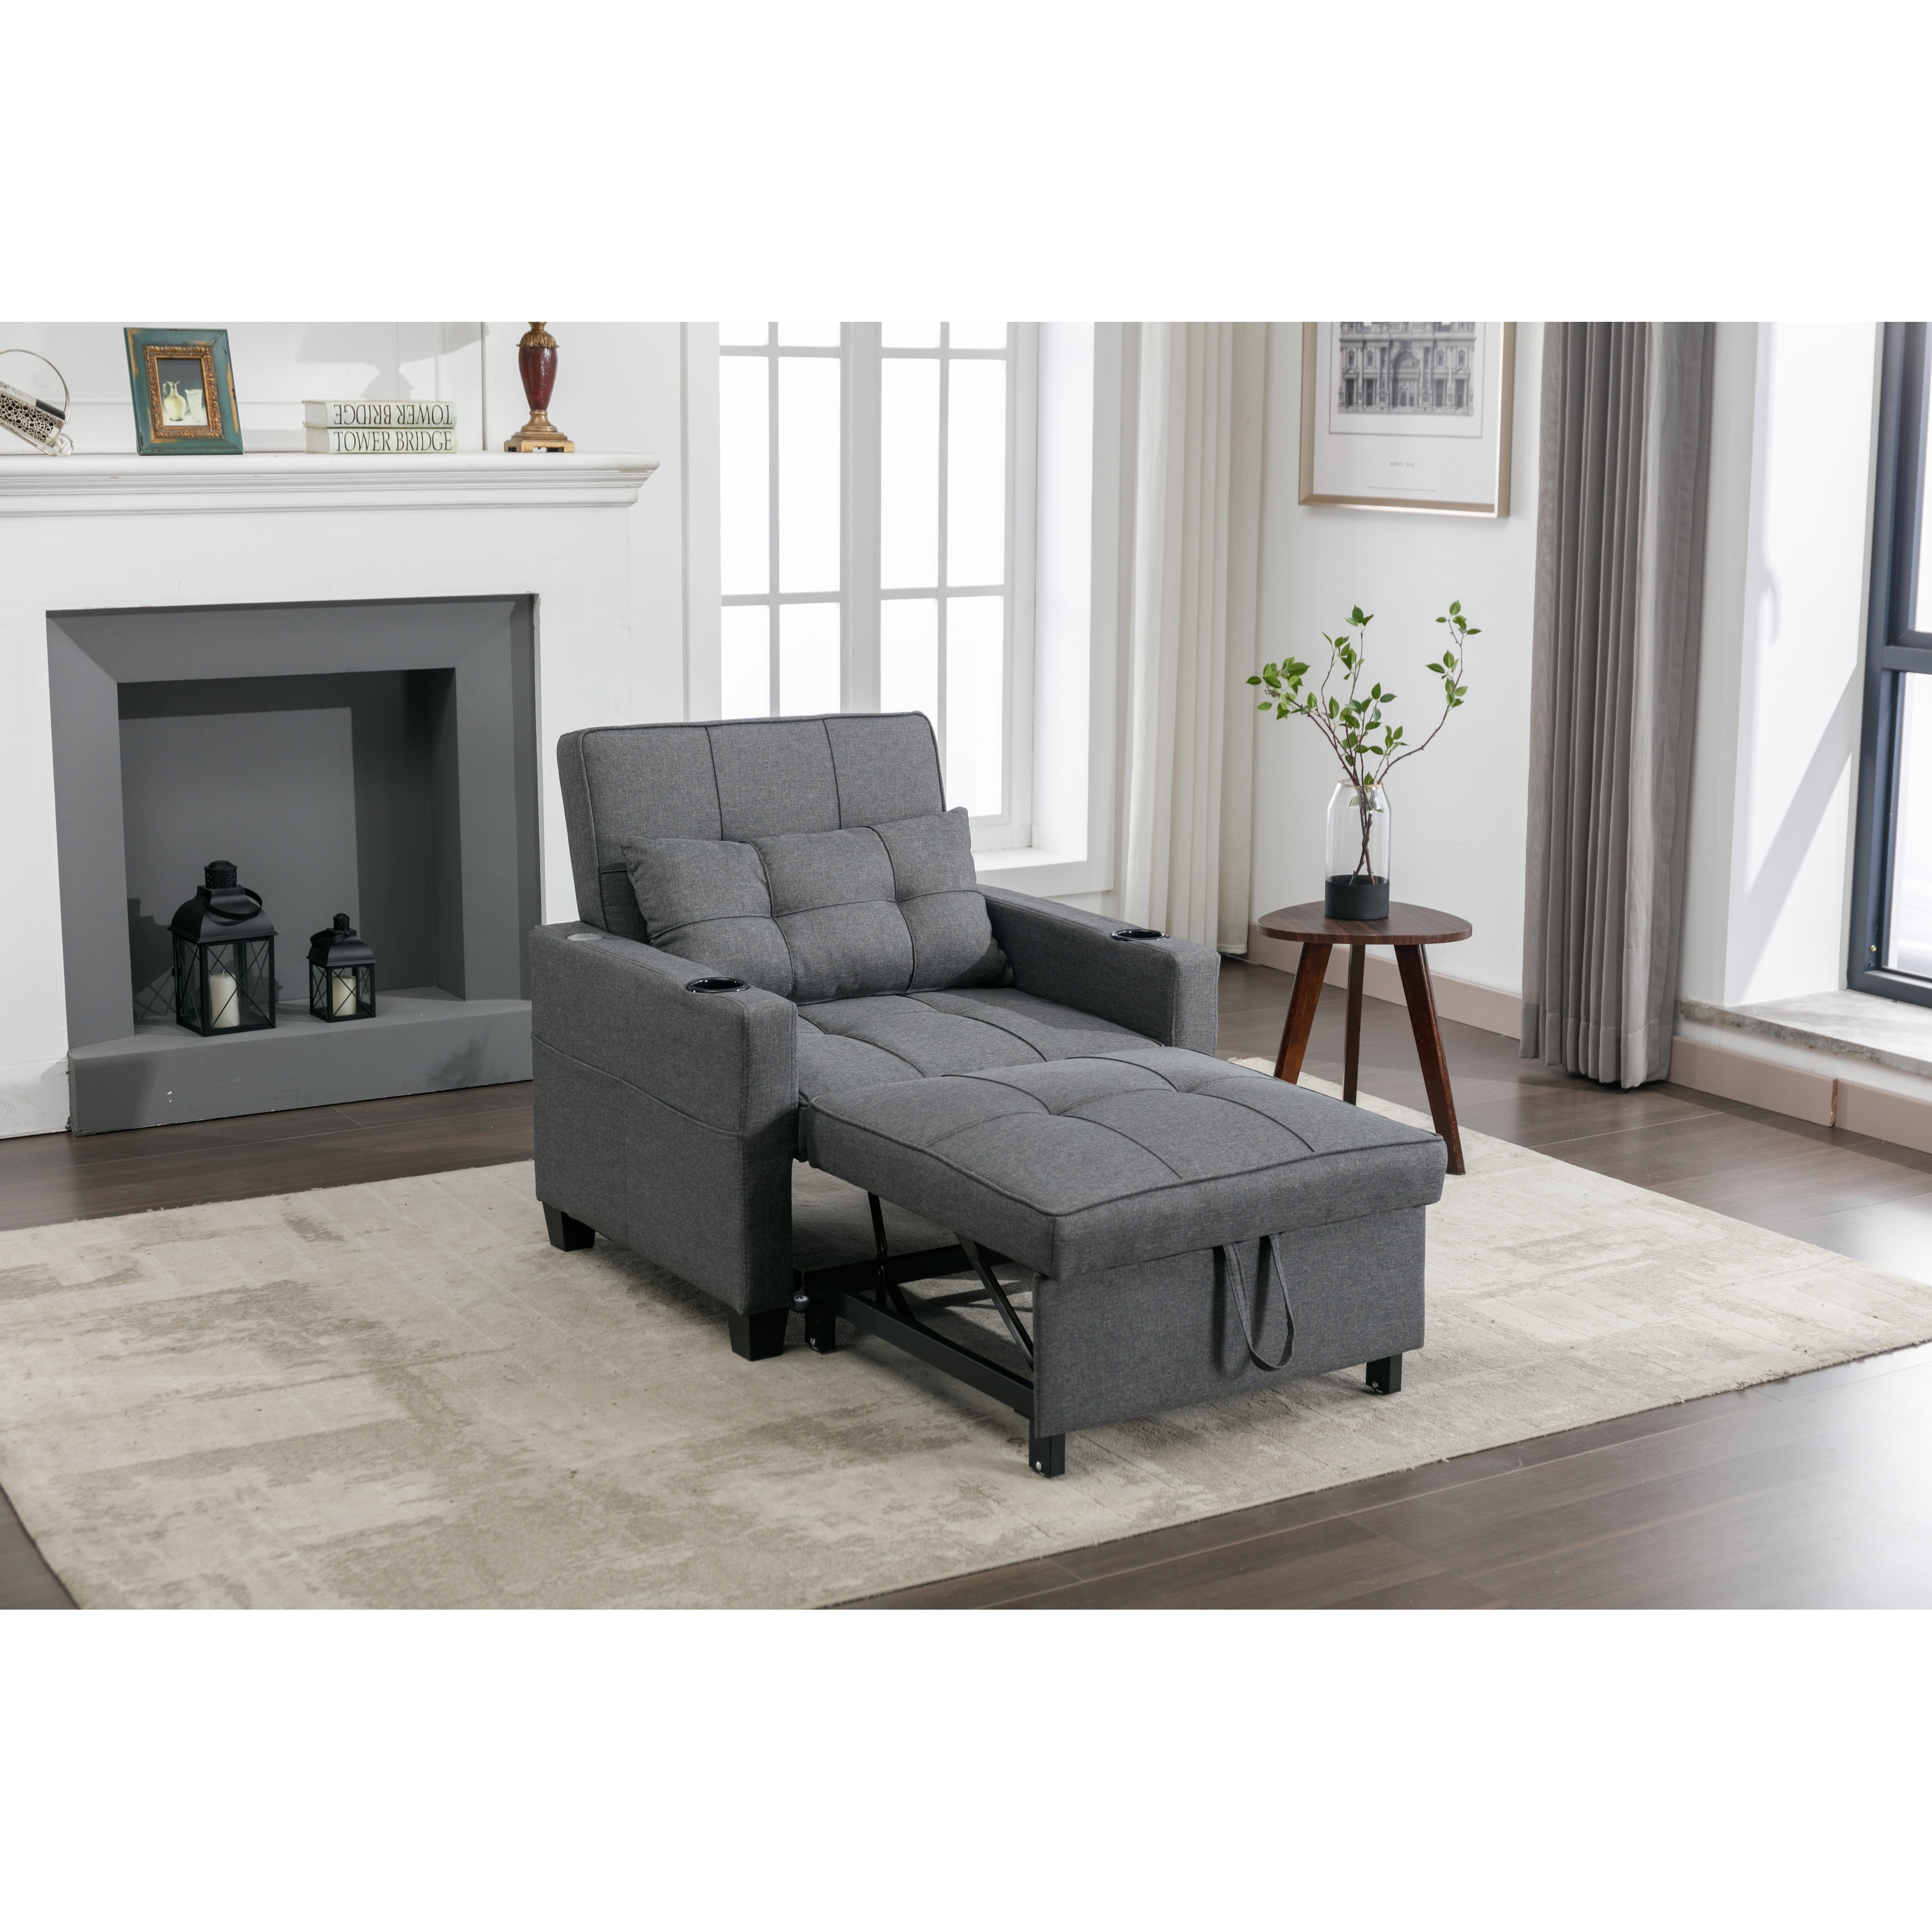 Sleepers Accent Chairs - Bed Bath & Beyond